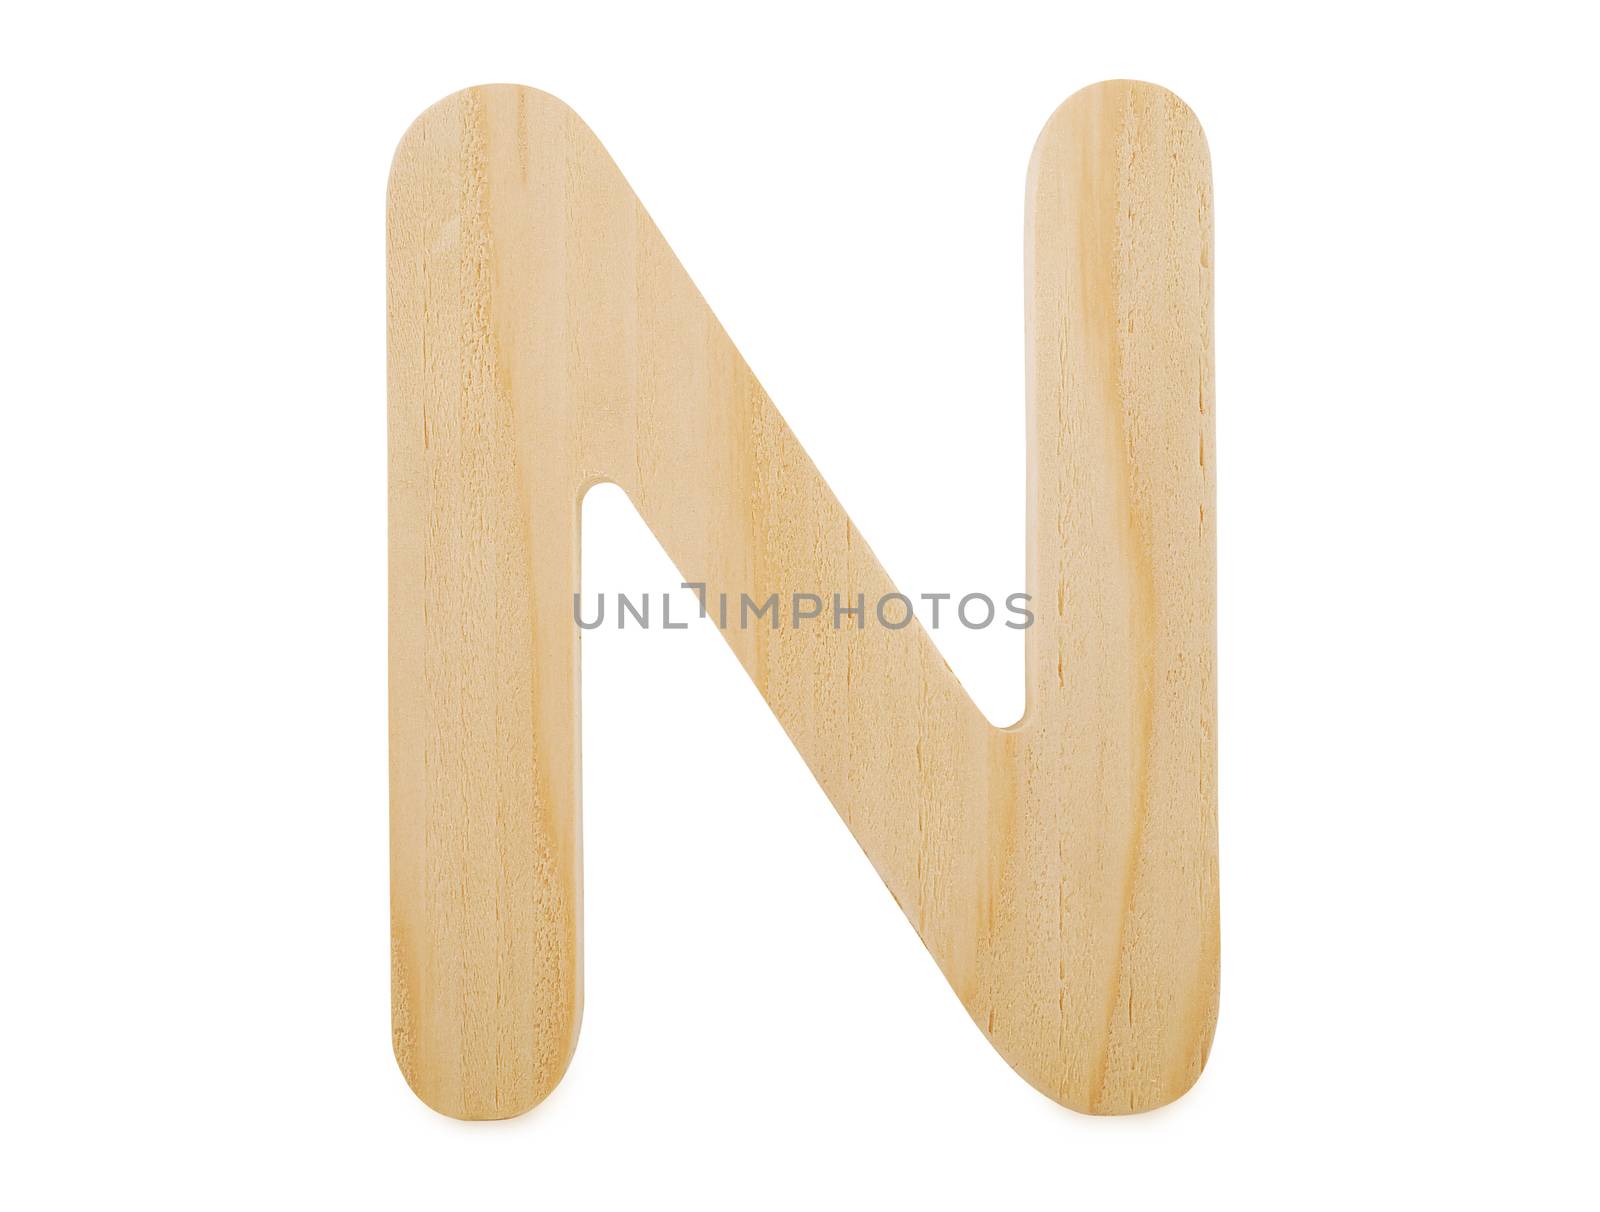 Wooden letter N by sewer12